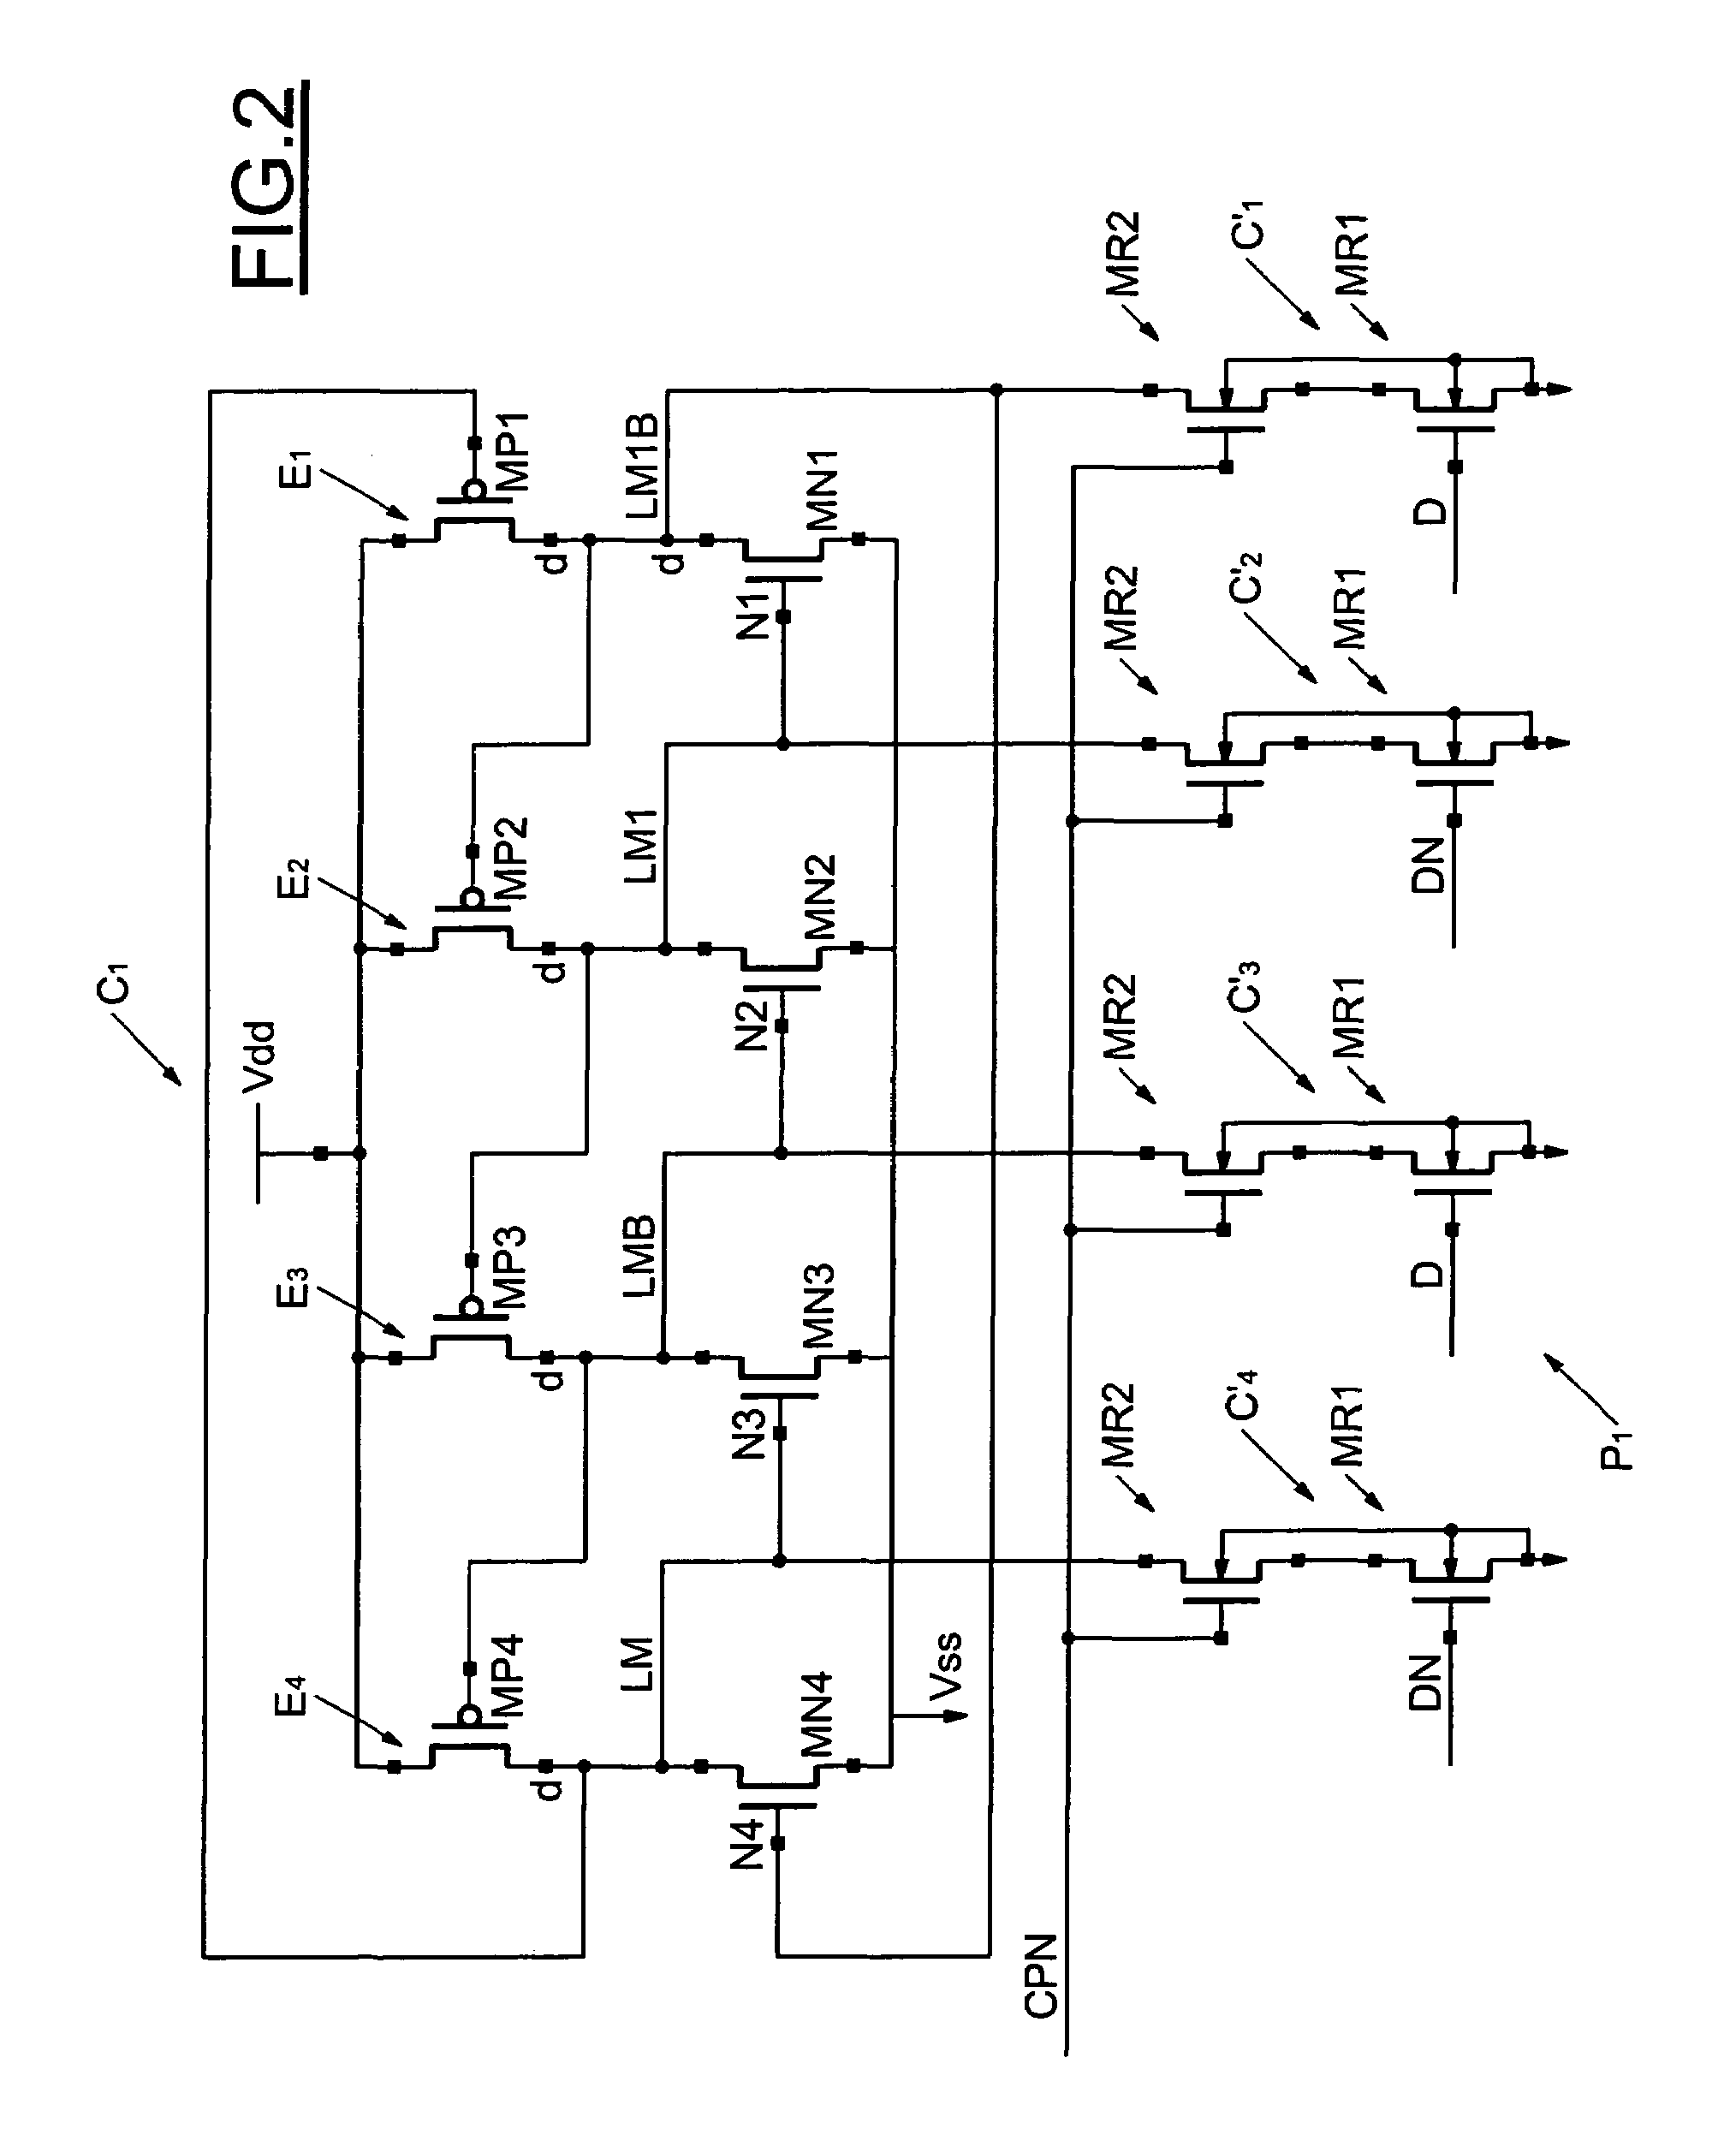 Multivibrator protected against current or voltage spikes